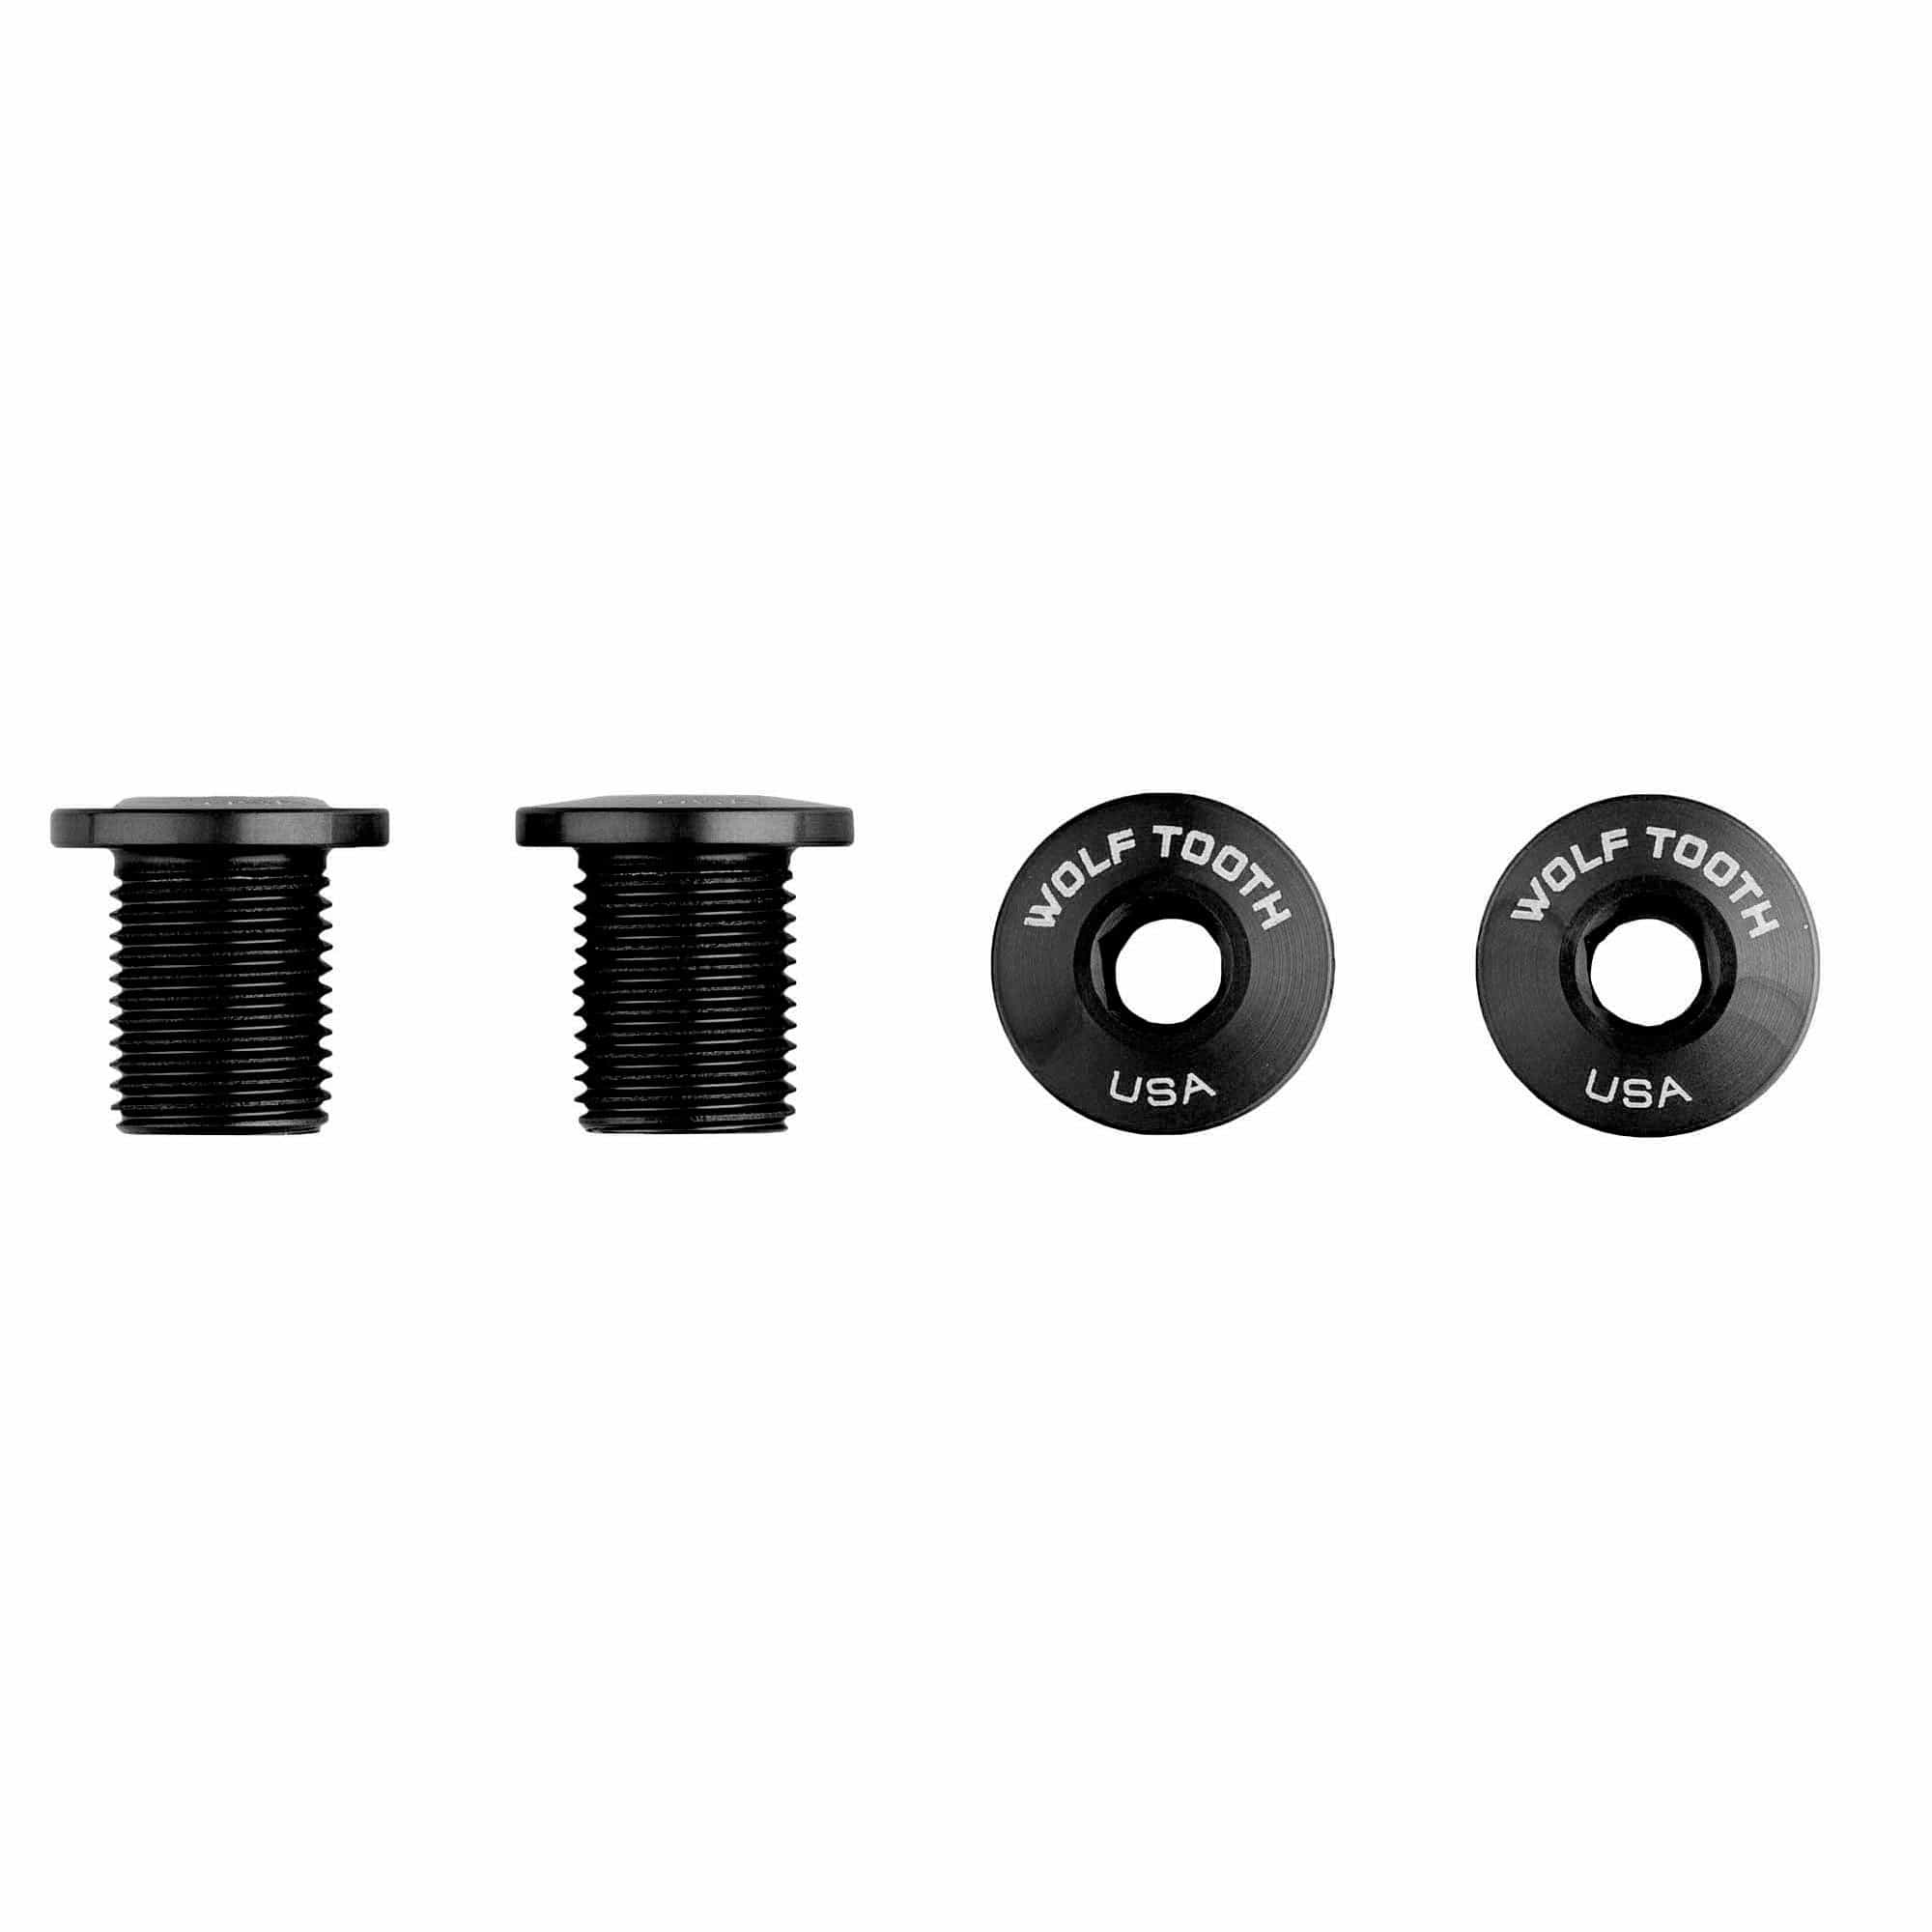 Set Of 4 Chainring Bolts For M8 Threaded Chainrings 10 Mm Long Wolf Tooth Components